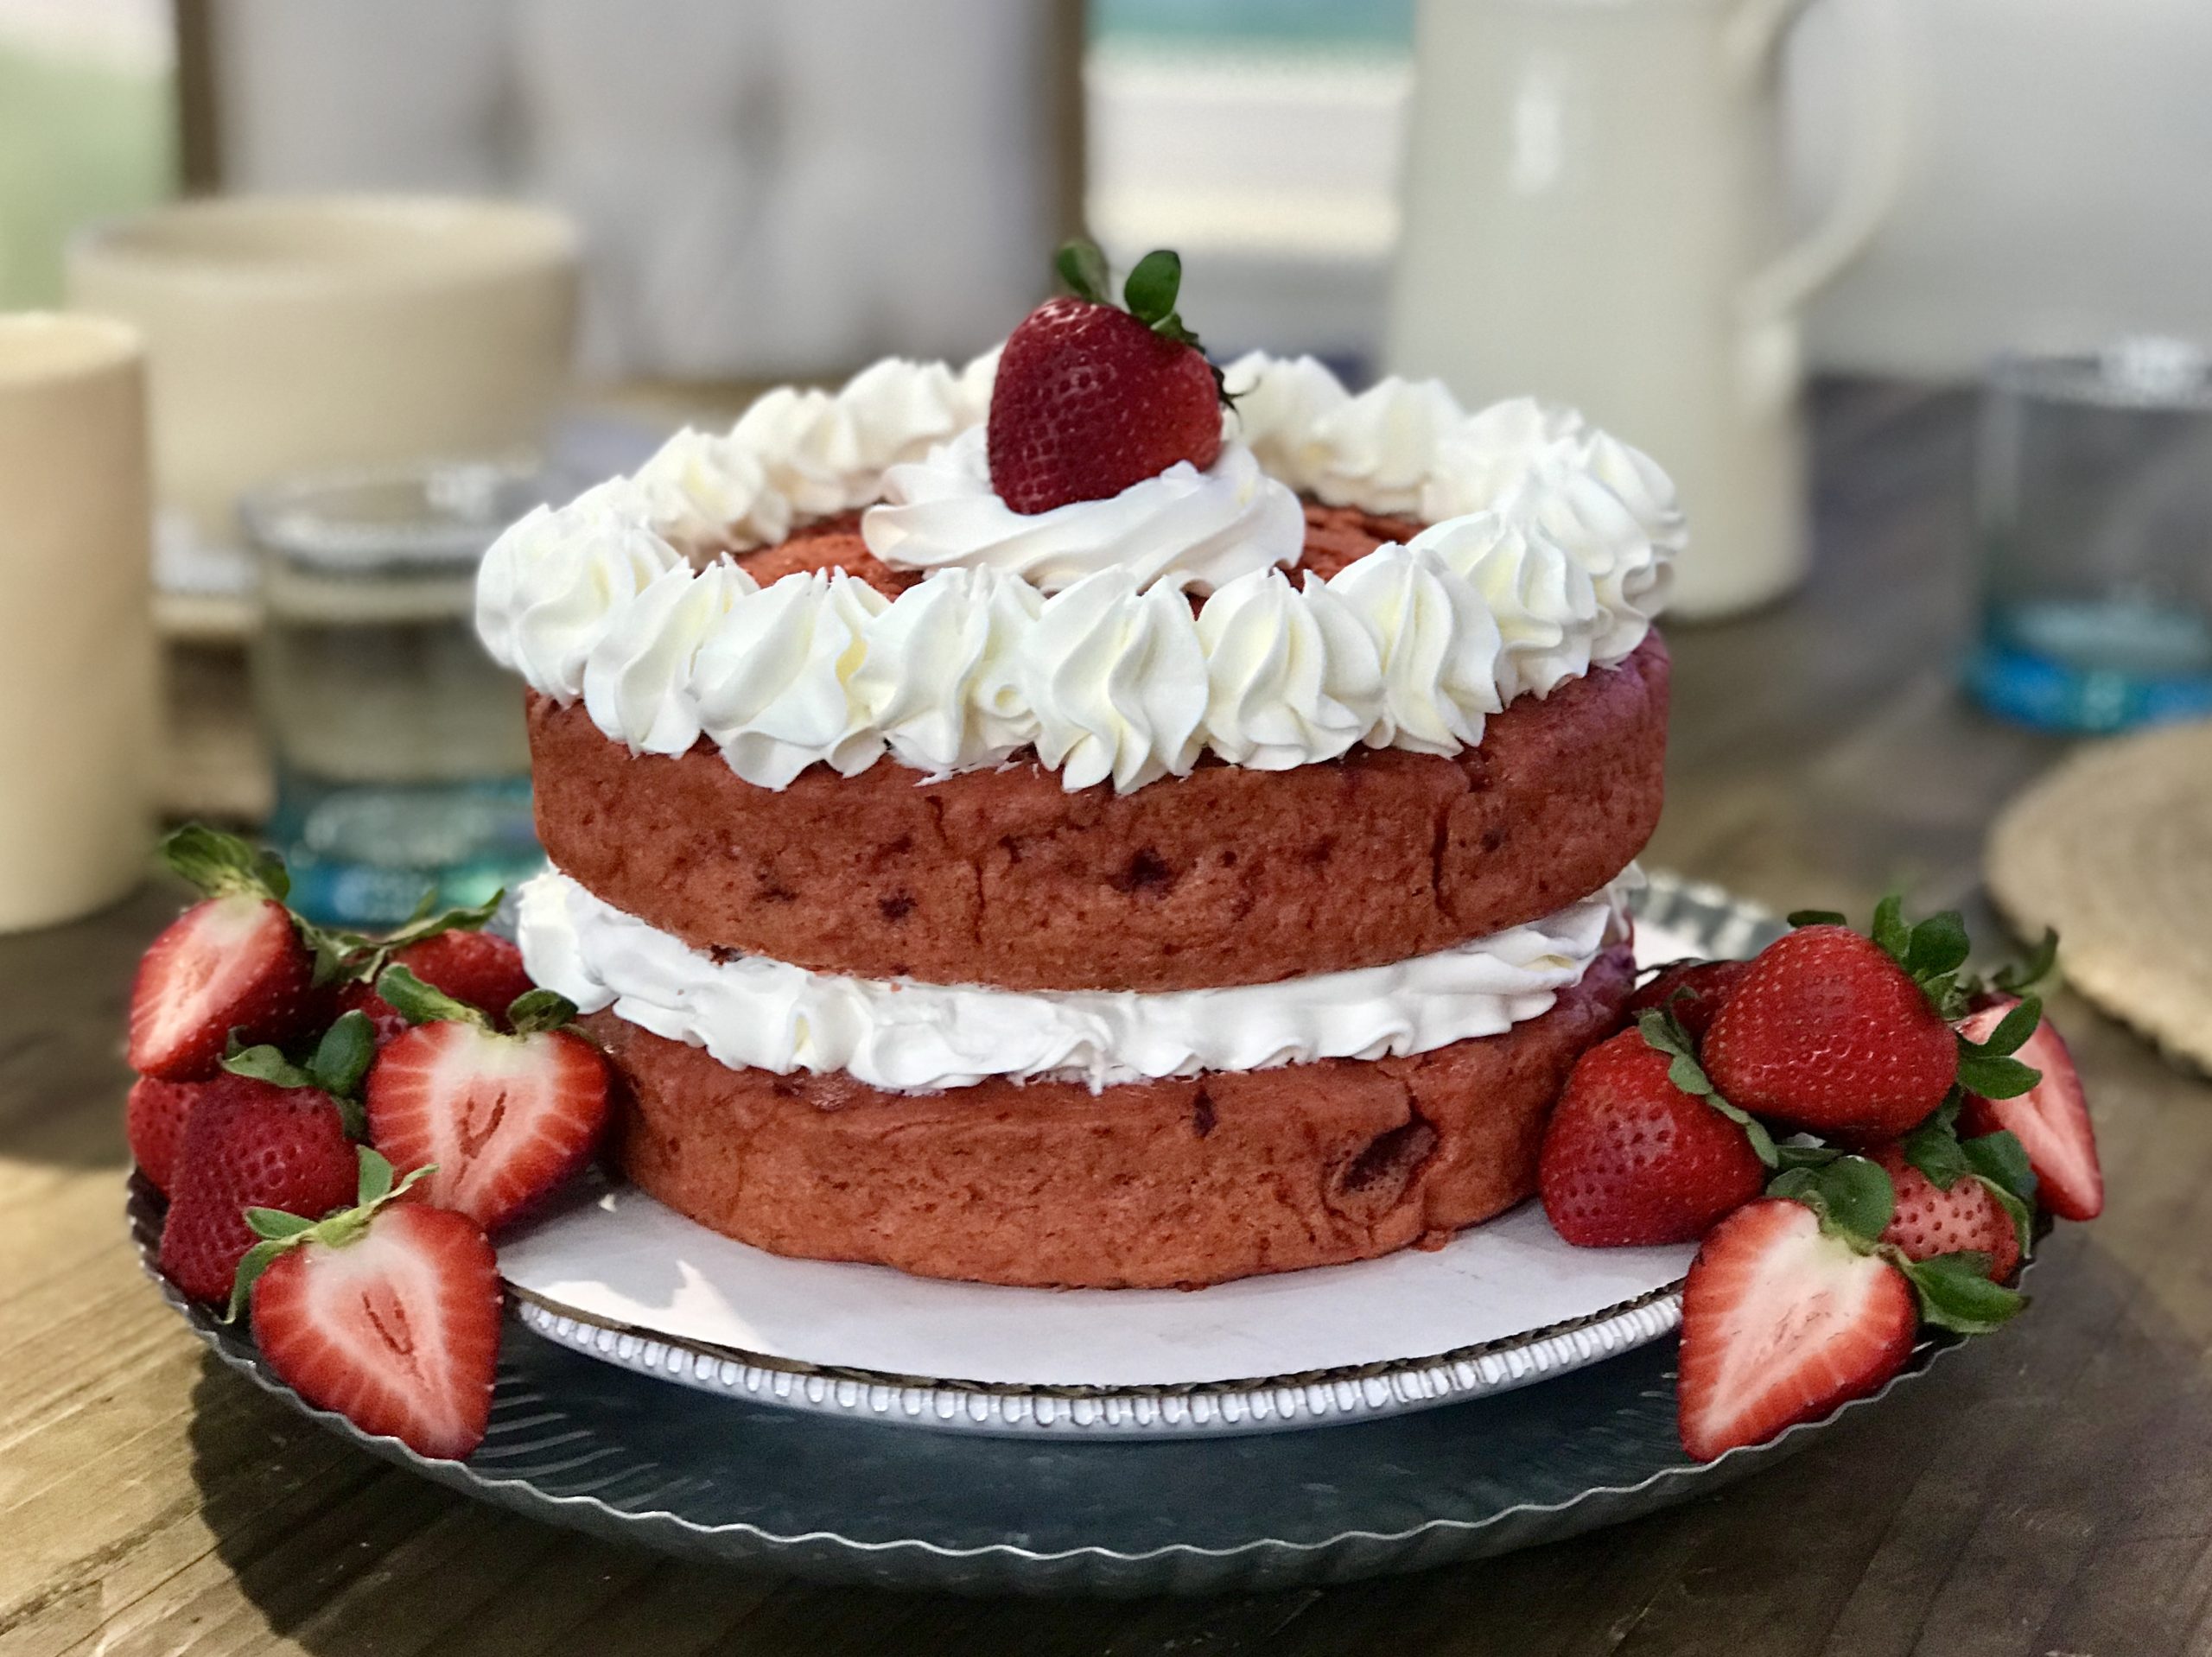 Duncan Hines Strawberry Cake Ideas : Strawberry Champagne Cake A Doctored Cake Mix My Cake School : Melted butter, eggs, cream cheese, egg, strawberries, duncan hines cake mix and 1 more.